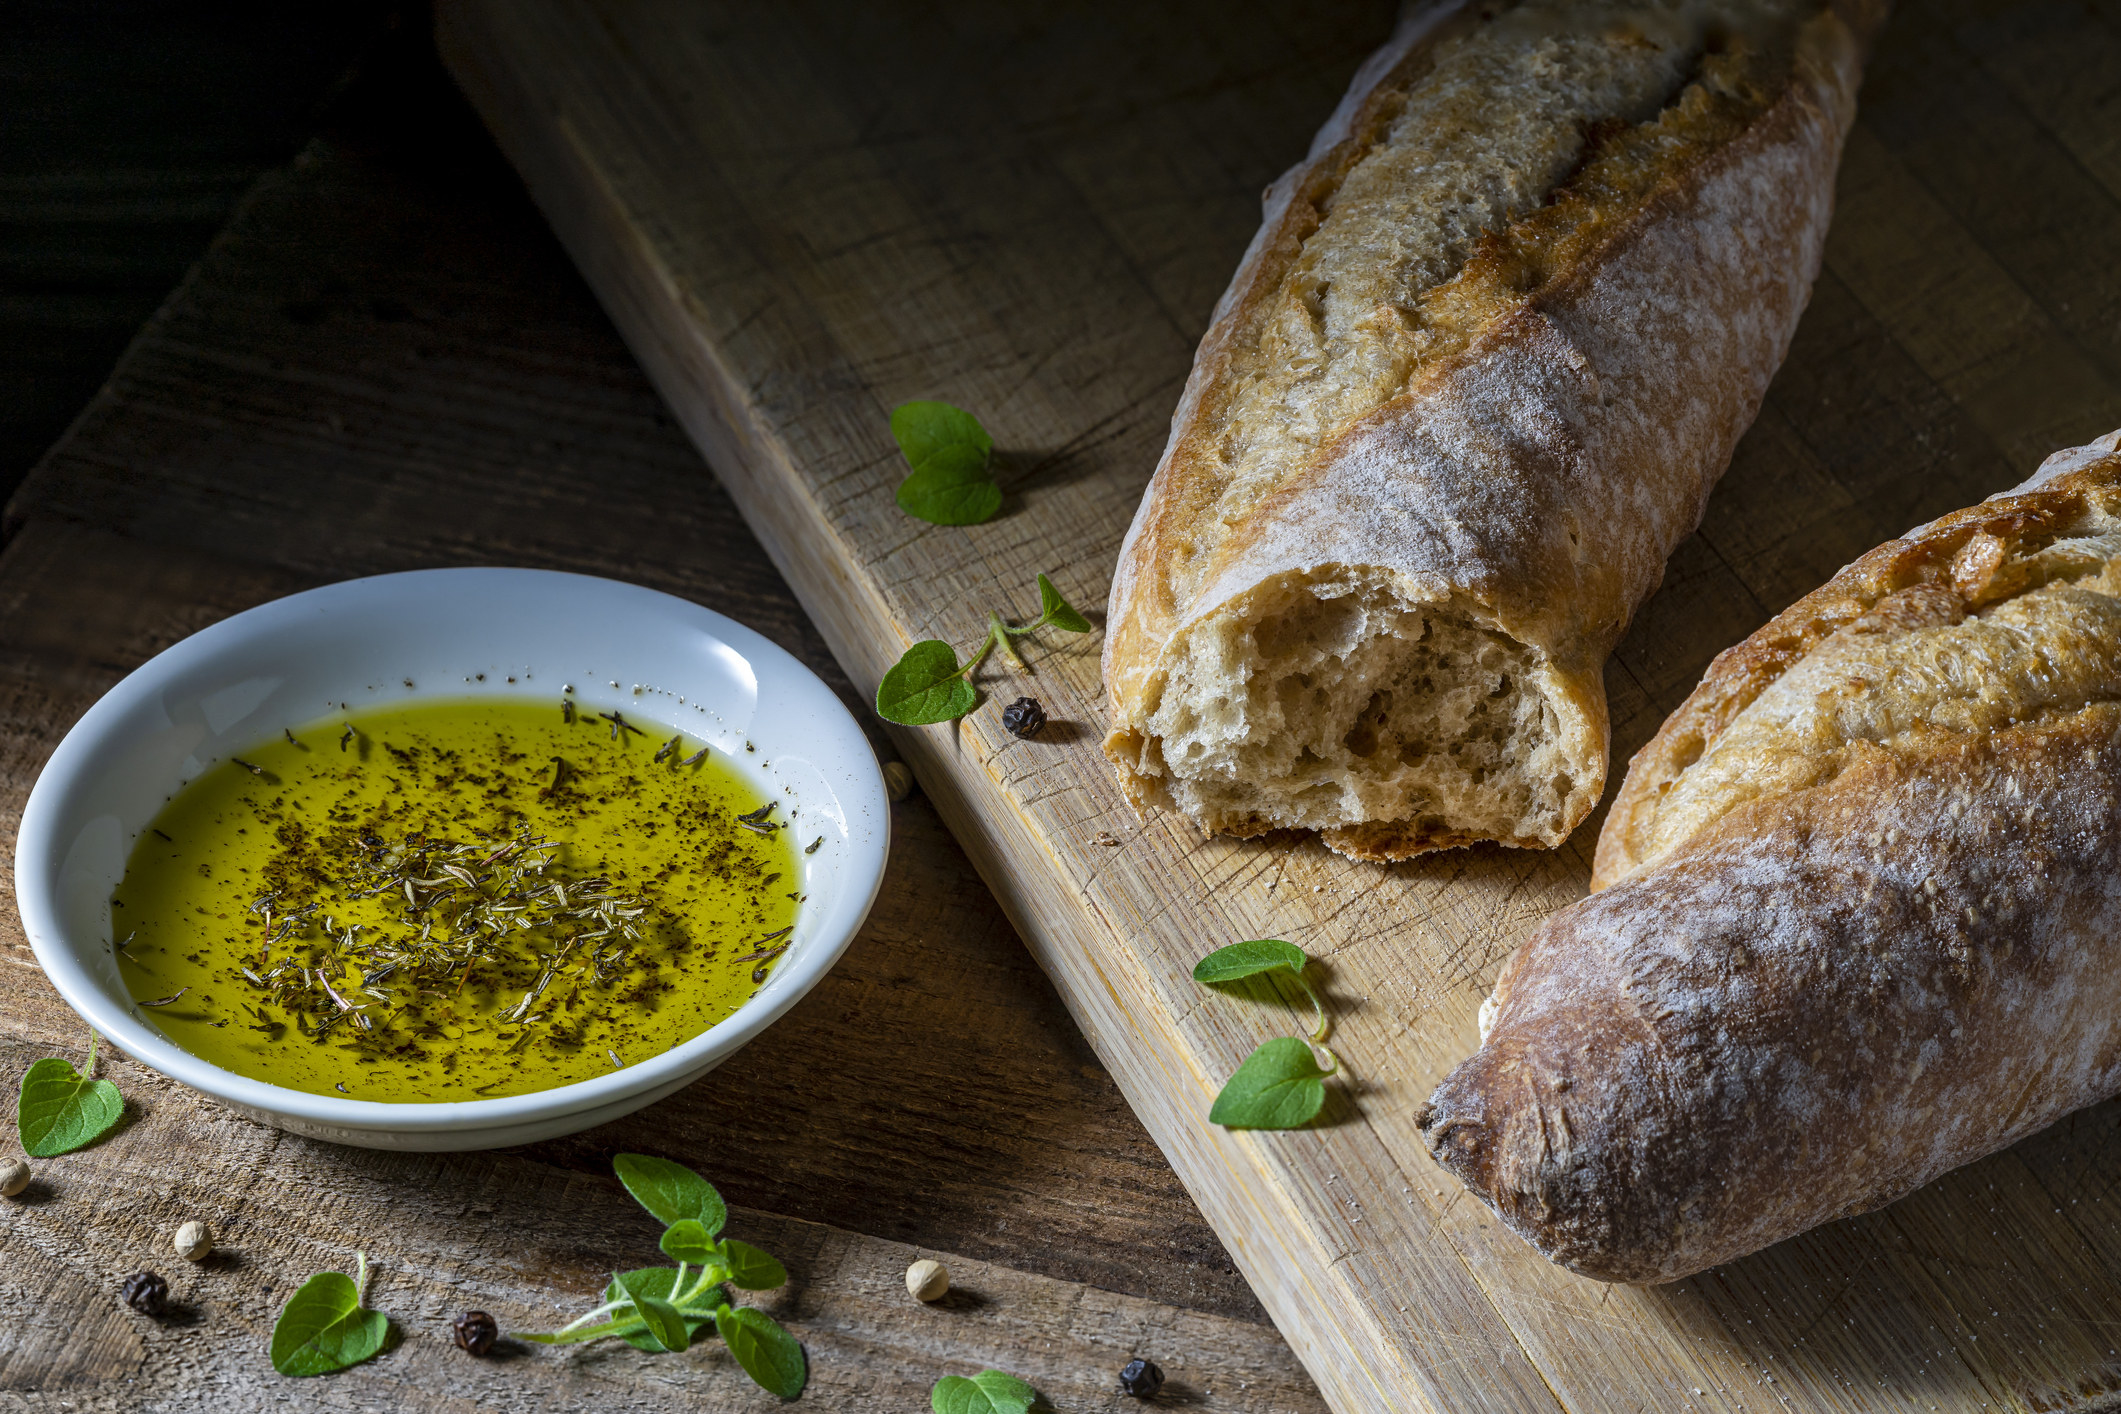 A baguette and olive oil for dipping.